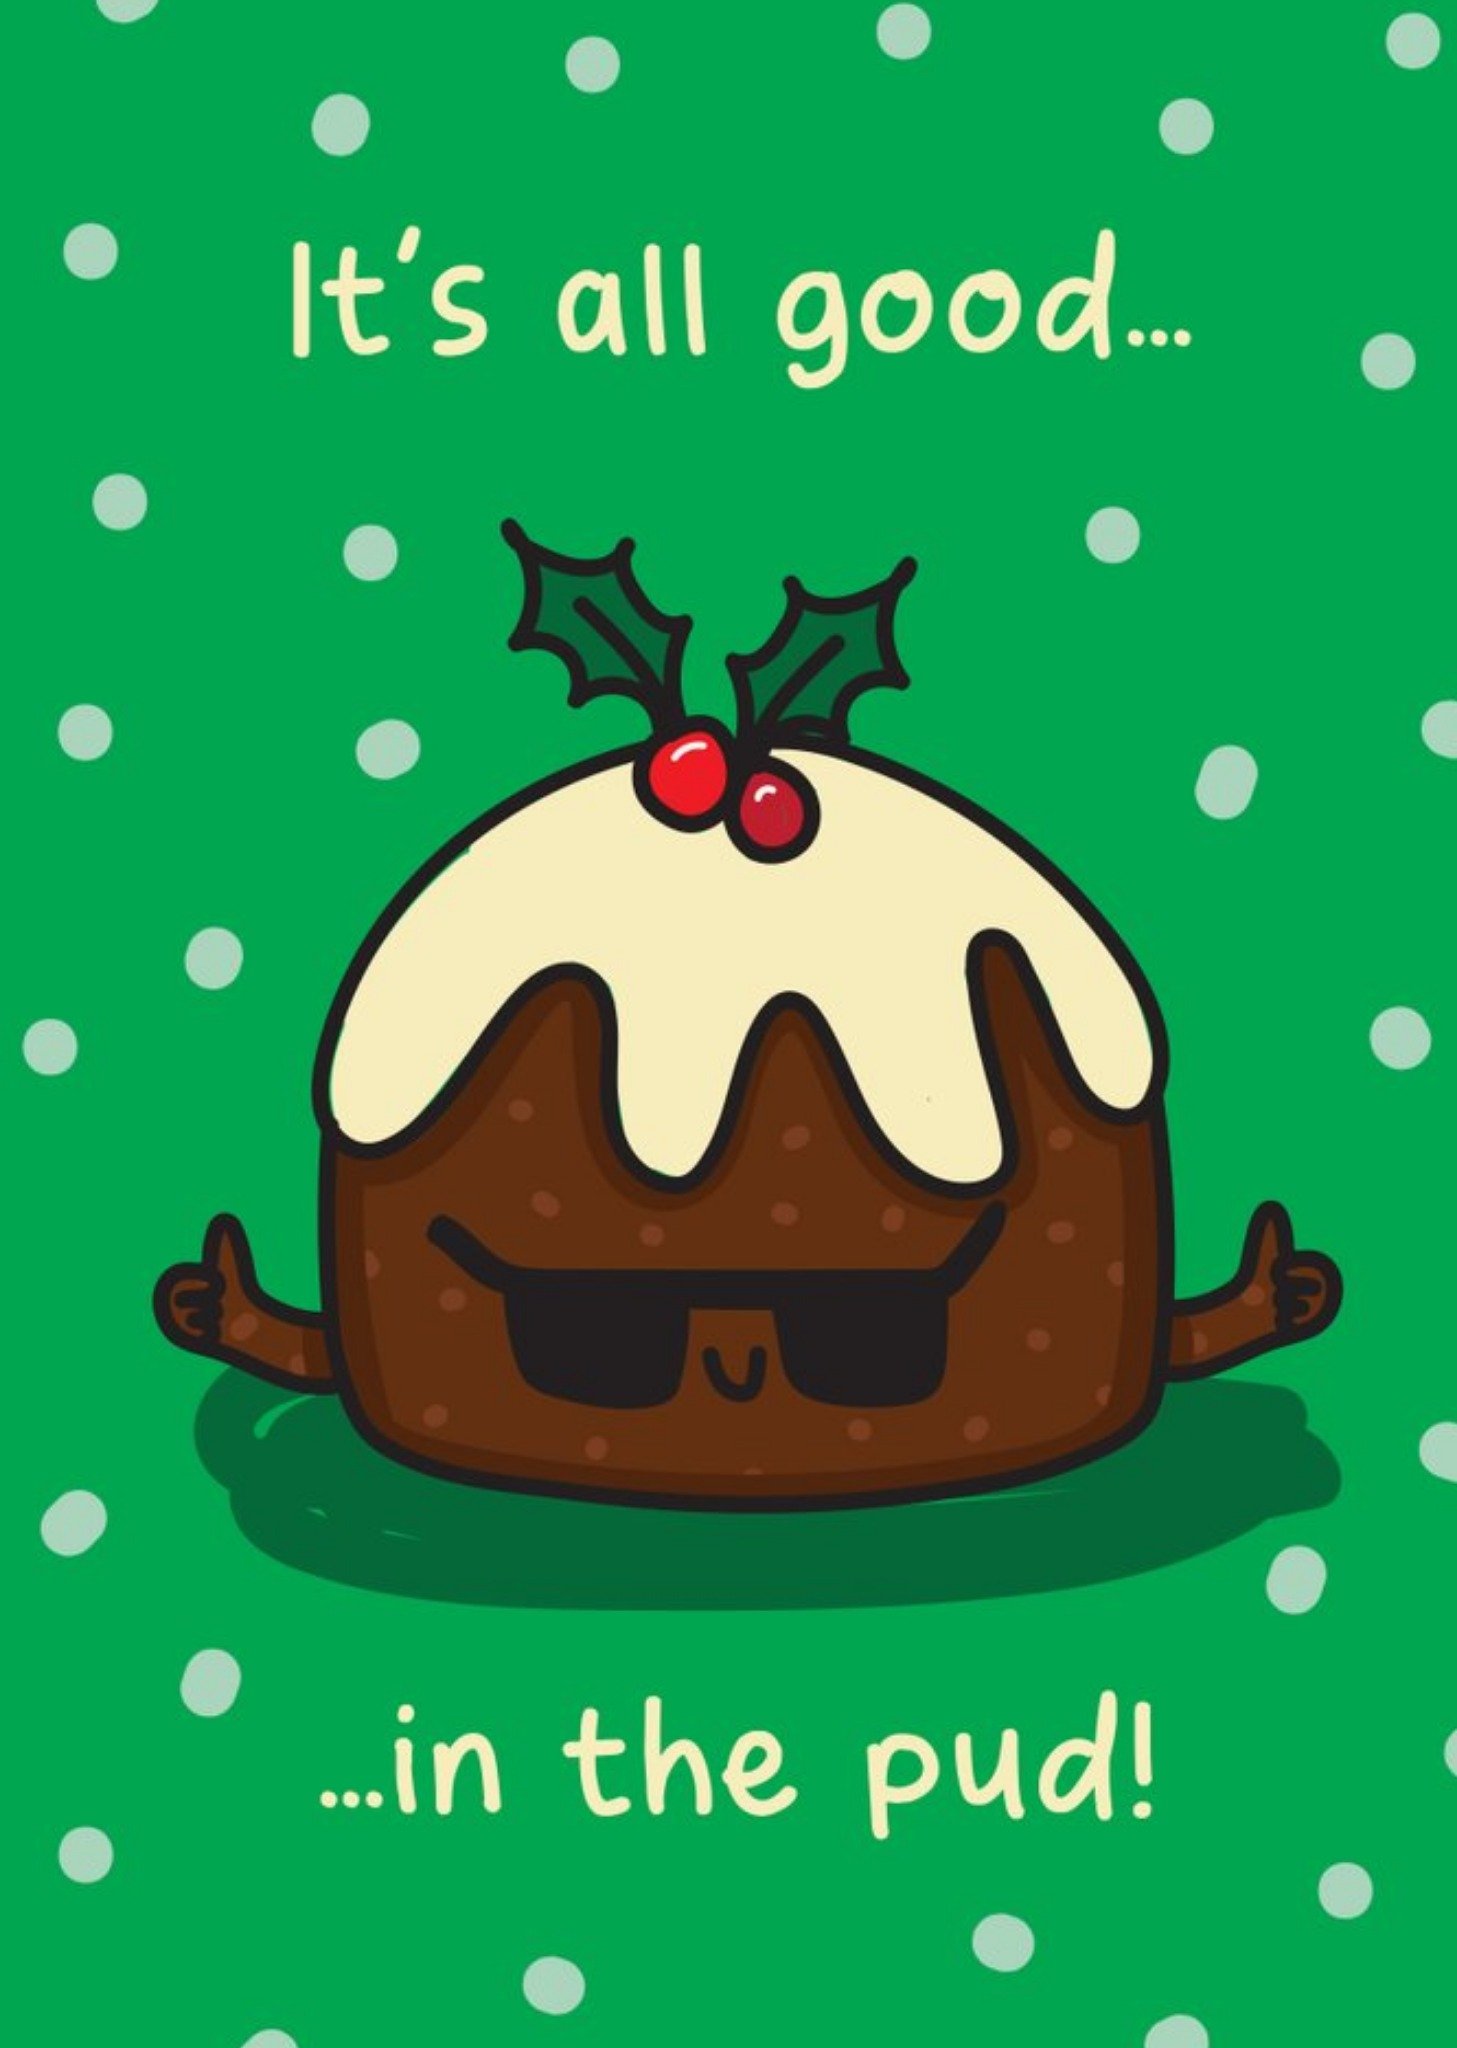 Moonpig Funny Pun It's All Good In The Pud Christmas Card Ecard